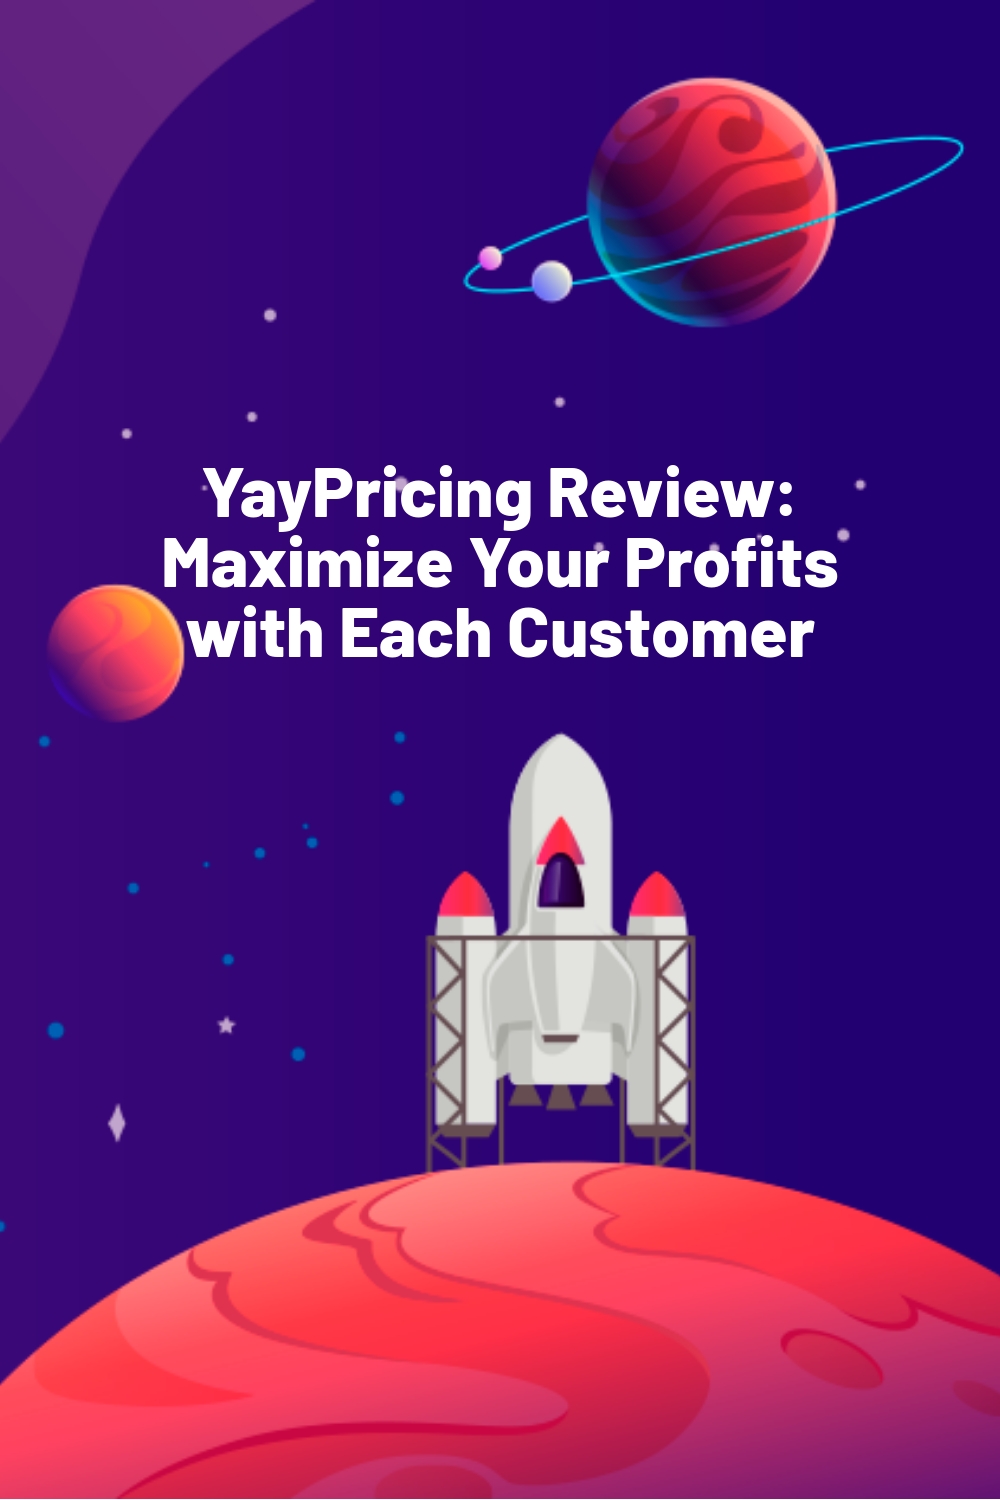 YayPricing Review: Maximize Your Profits with Each Customer